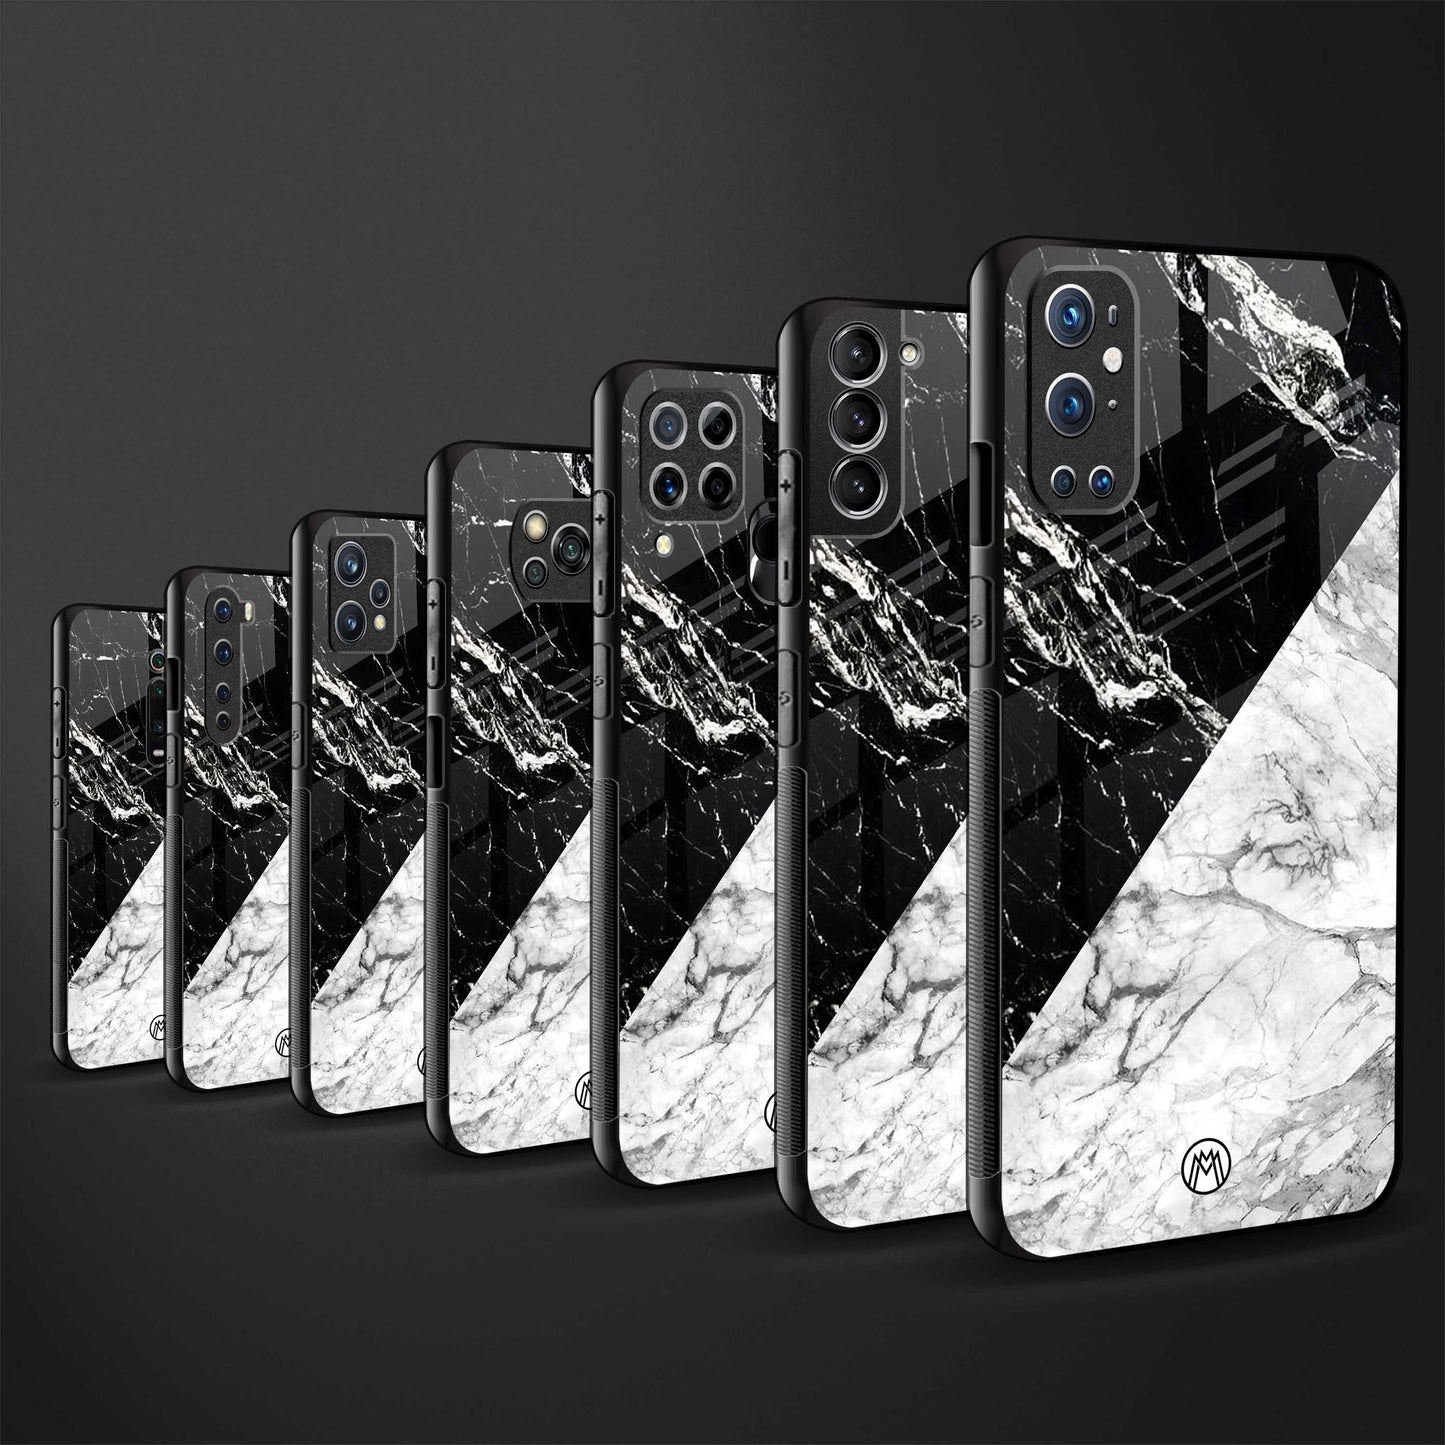 fatal contradiction phone cover for samsung galaxy s10 lite